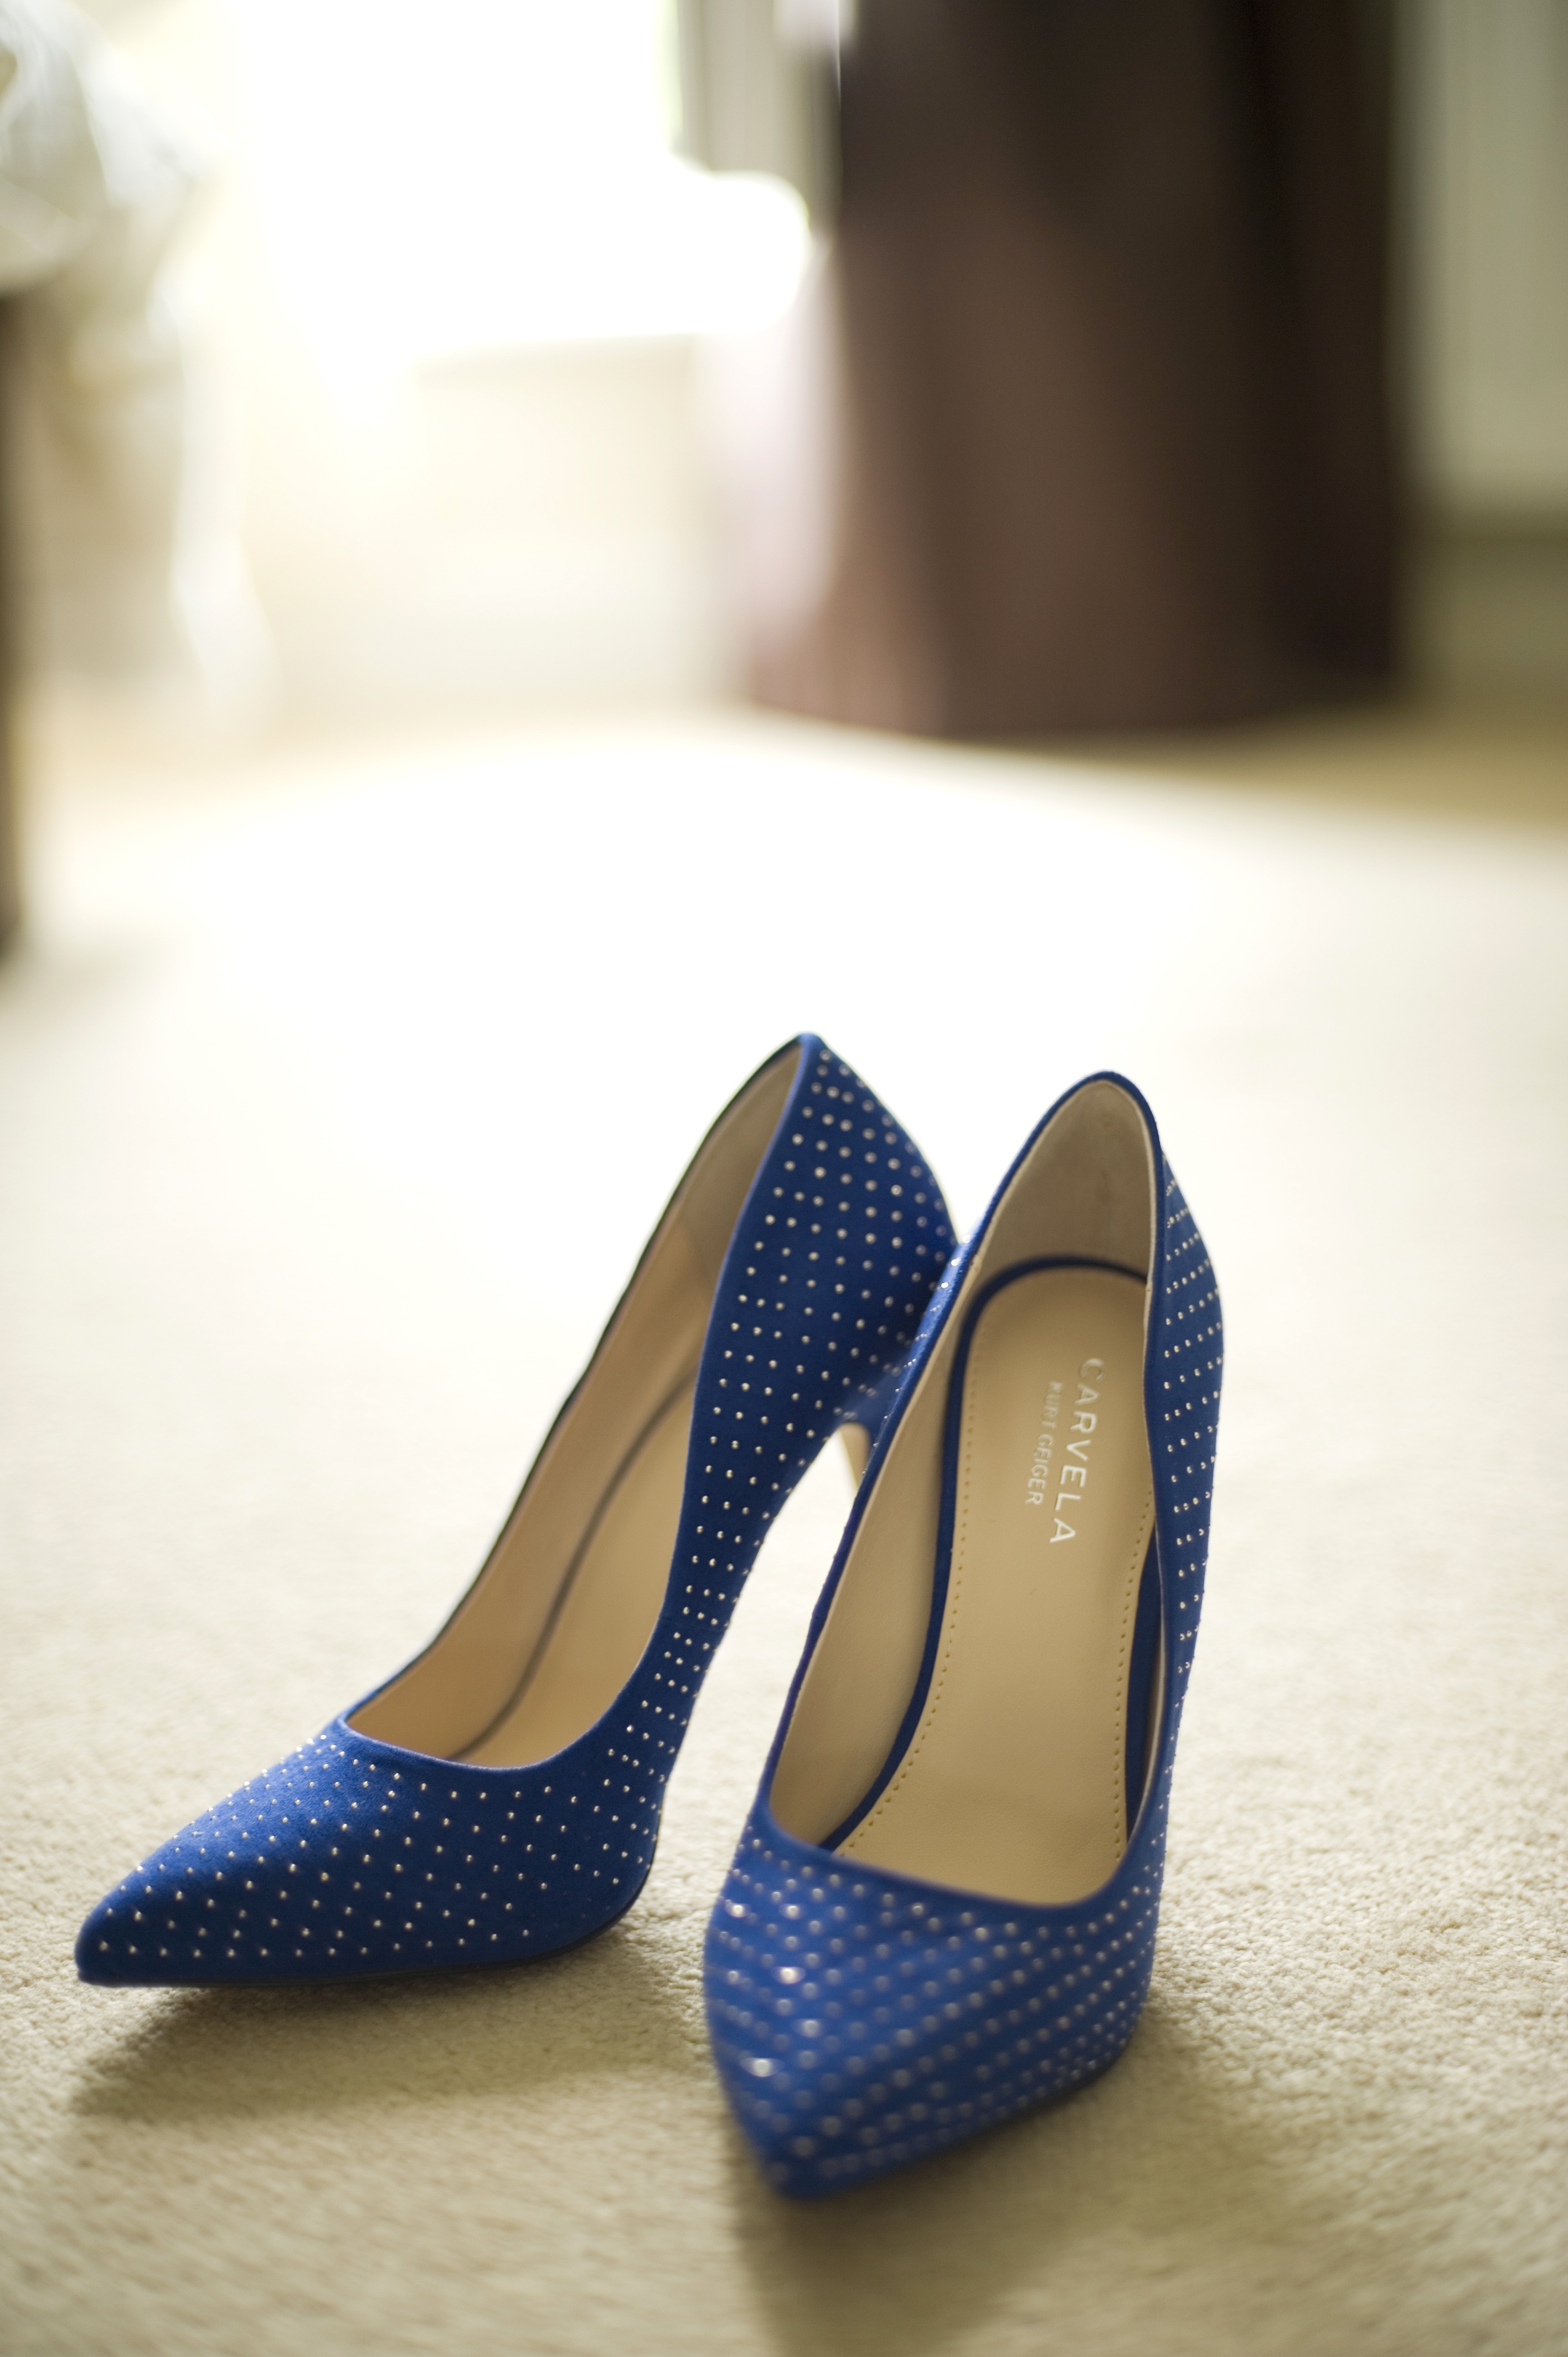 pair of blue and white polka dot leather pointed stiletto